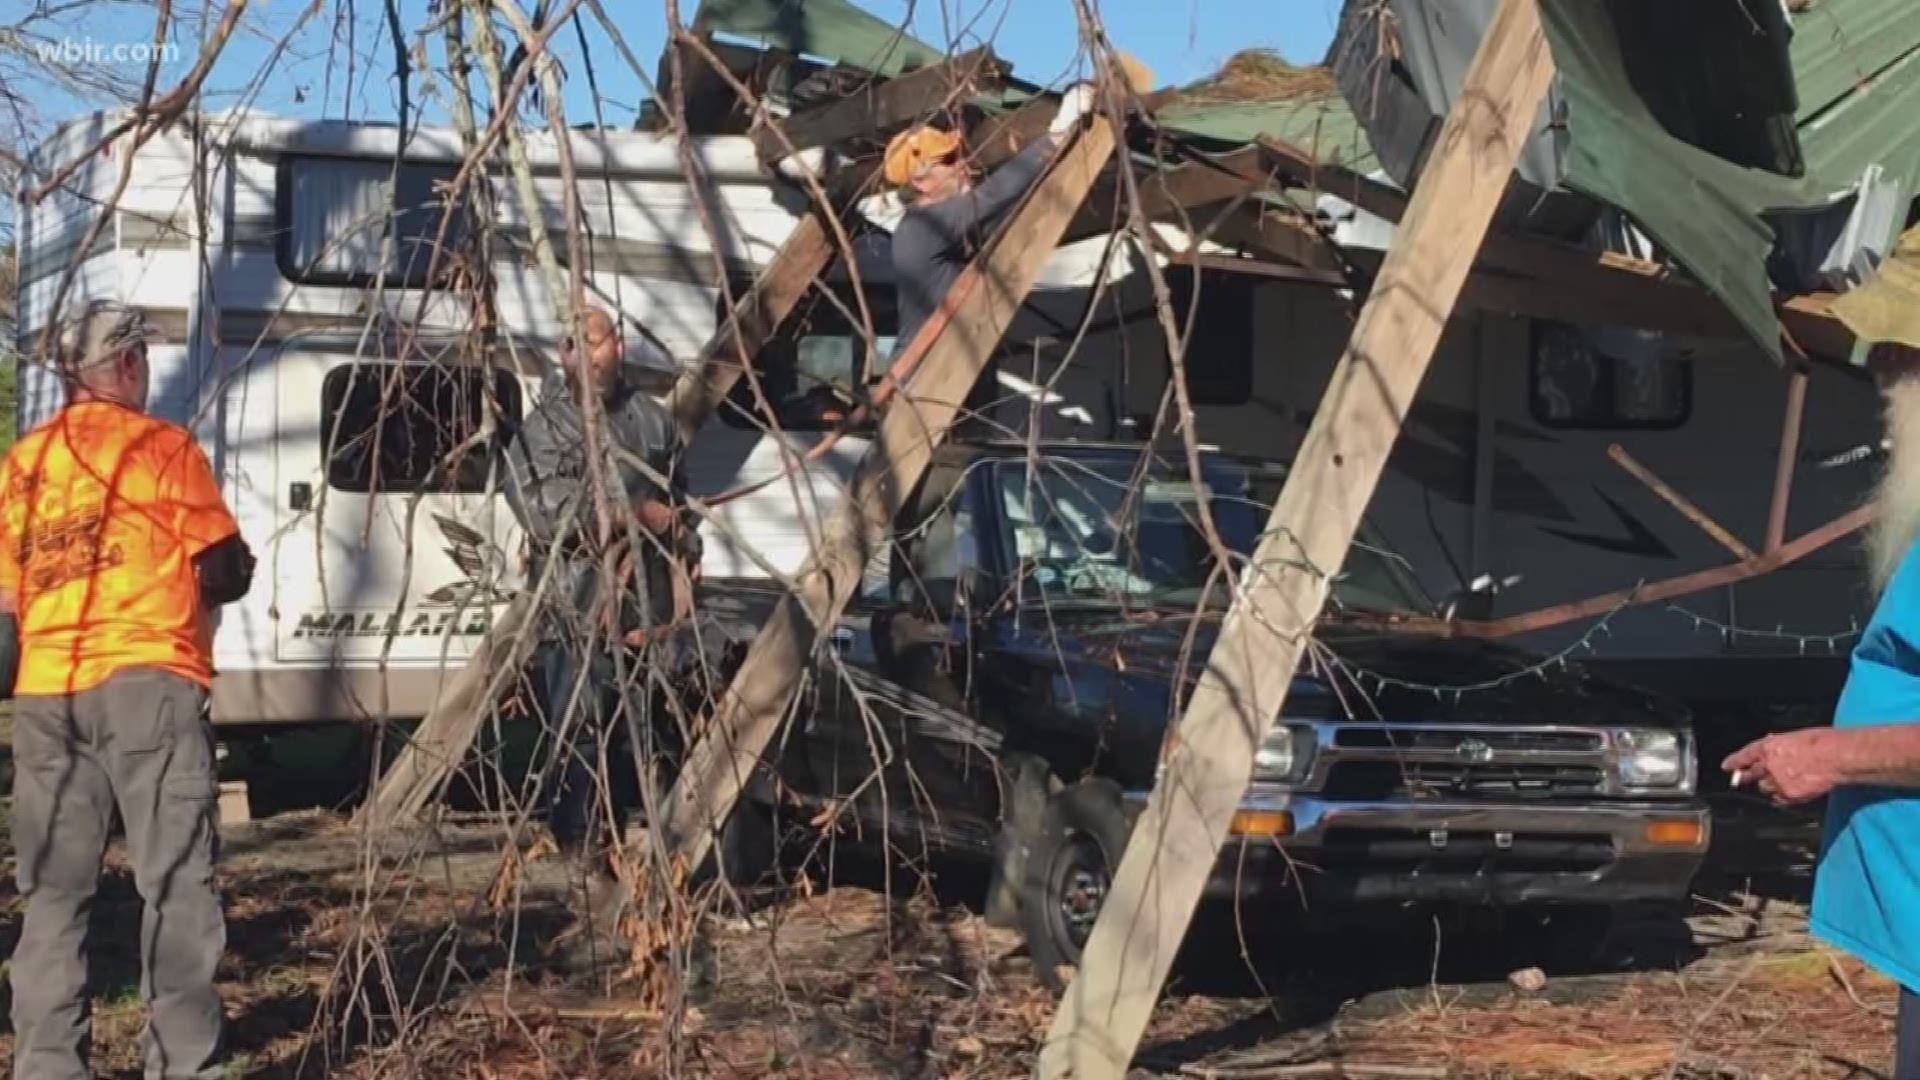 A group of 16 men from East Tennessee, called the 865 Vols, traveled to Mexico City Beach to help homeowners clean up the debris left over from Hurricane Michael.